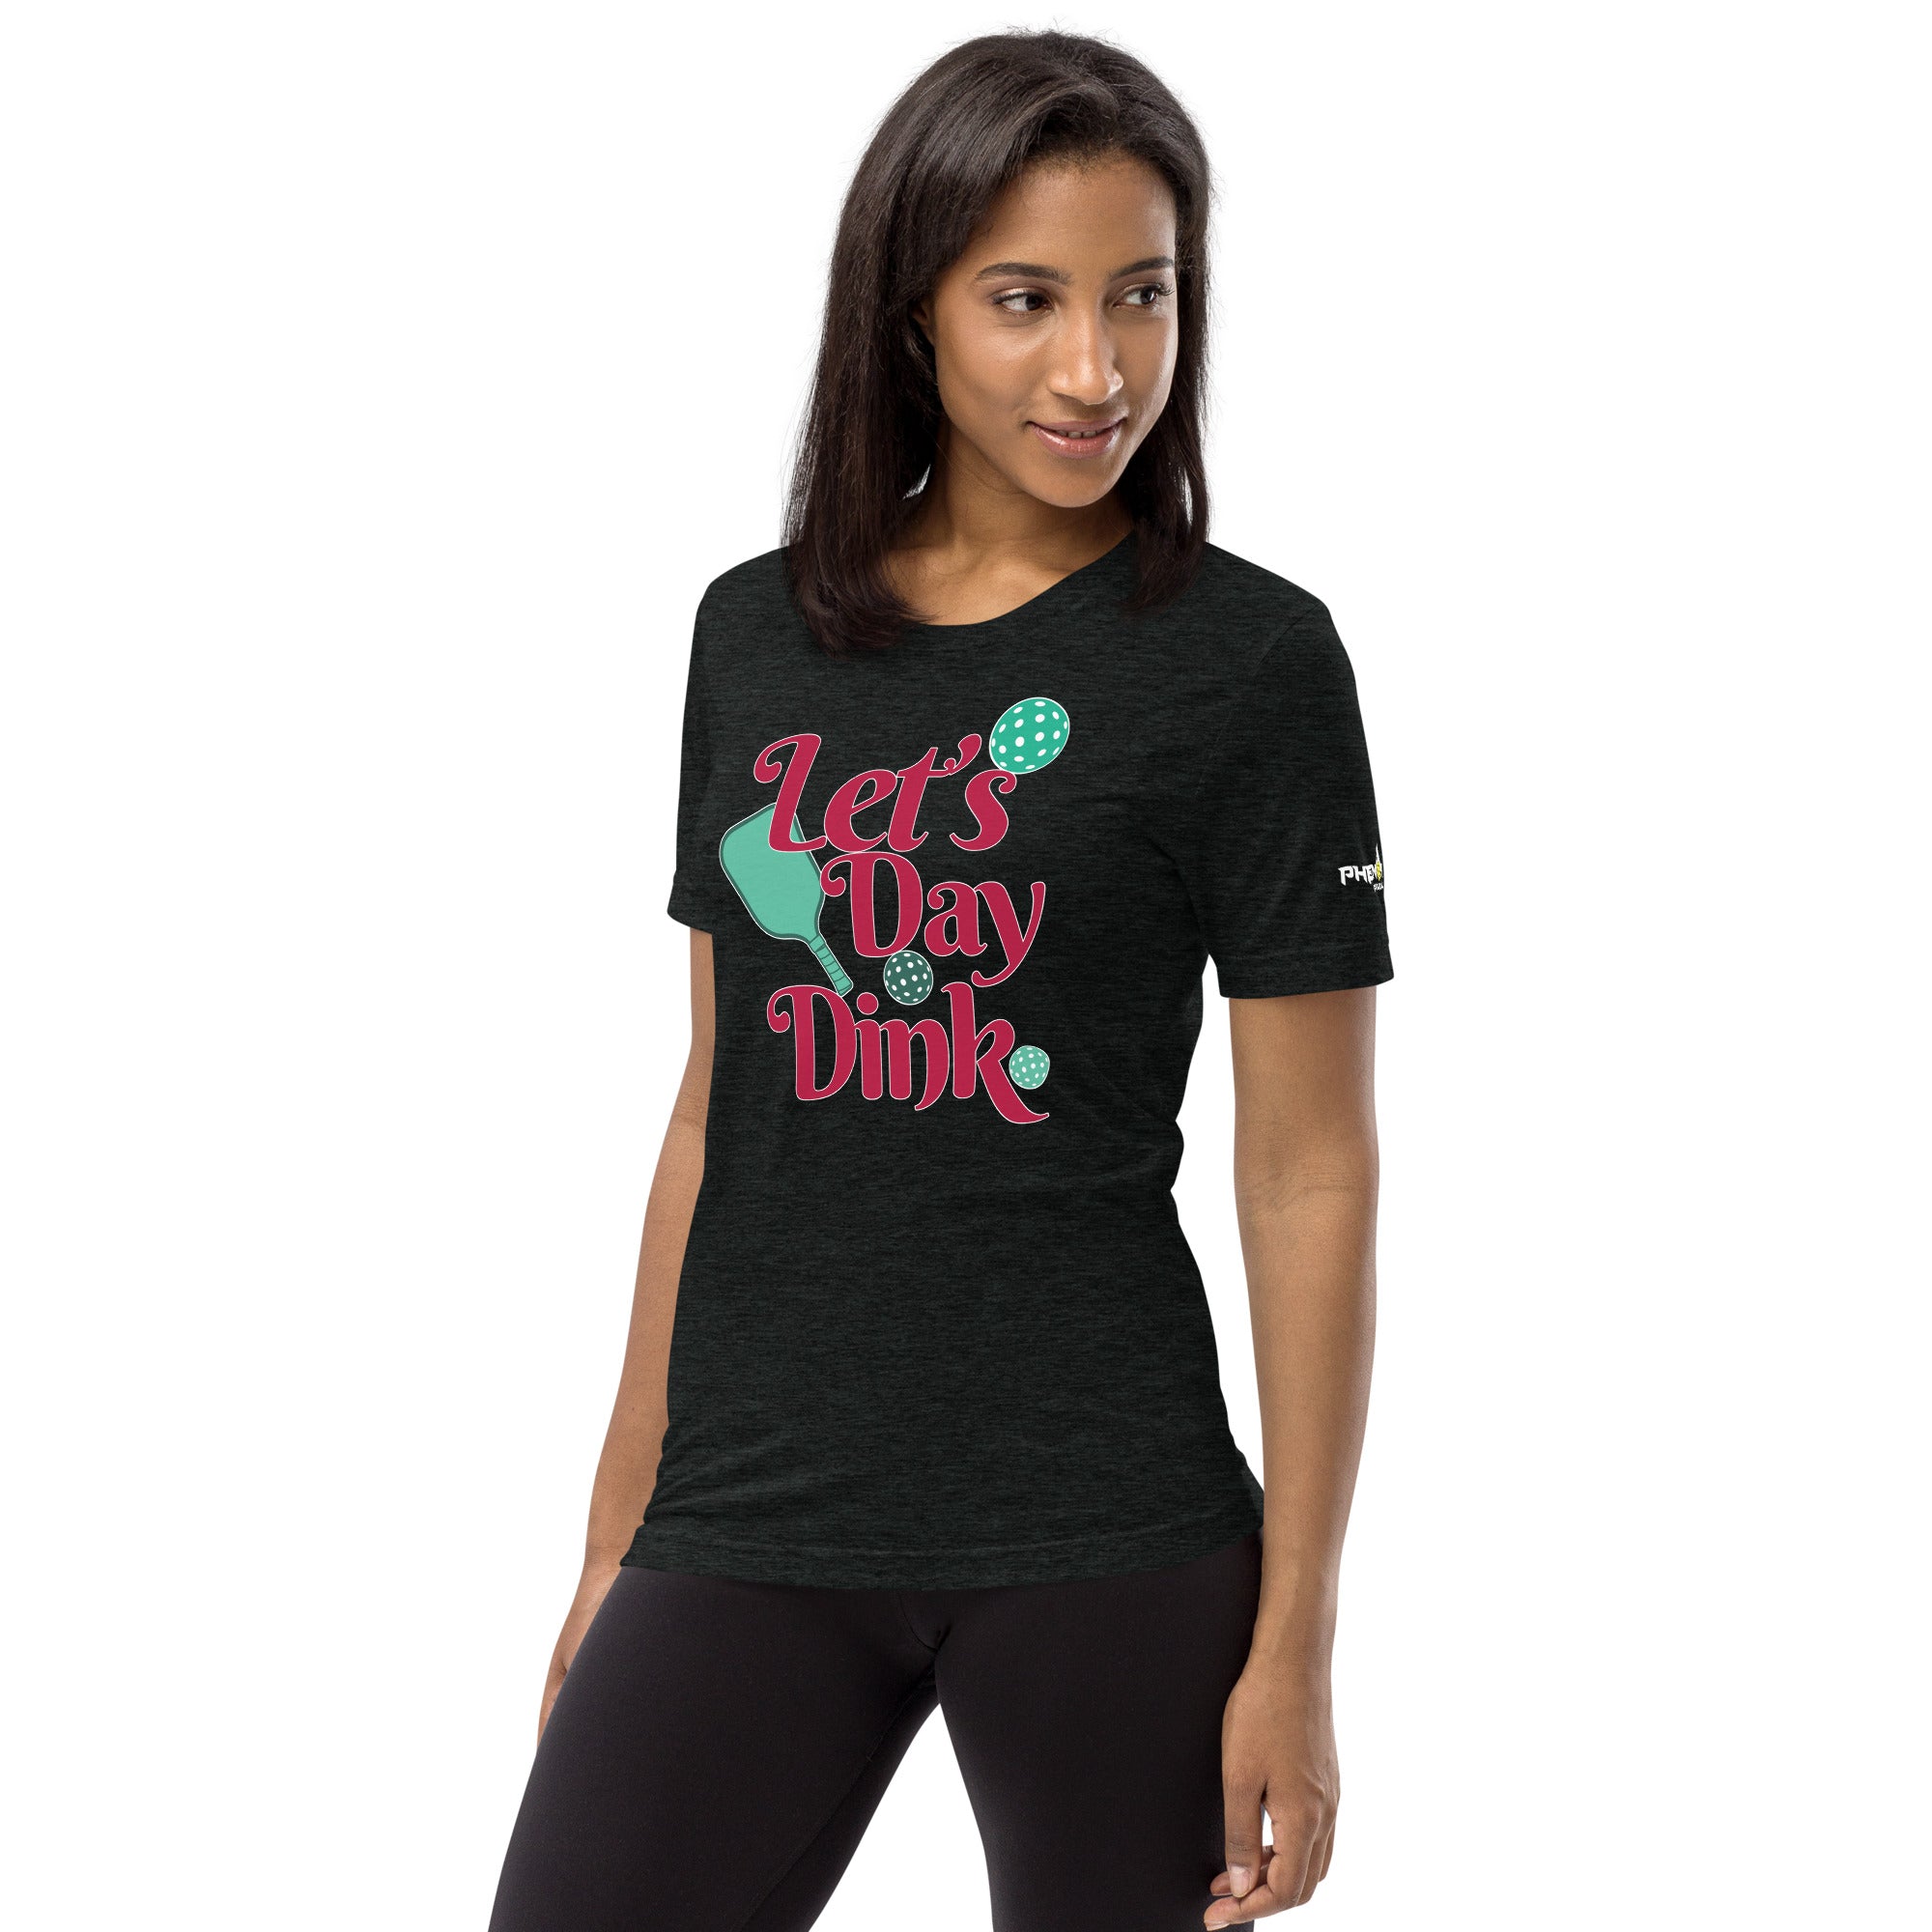 smiling woman looking to left wearing heather charcoal let's day dink pickleball shirt performance apparel athletic top left front view